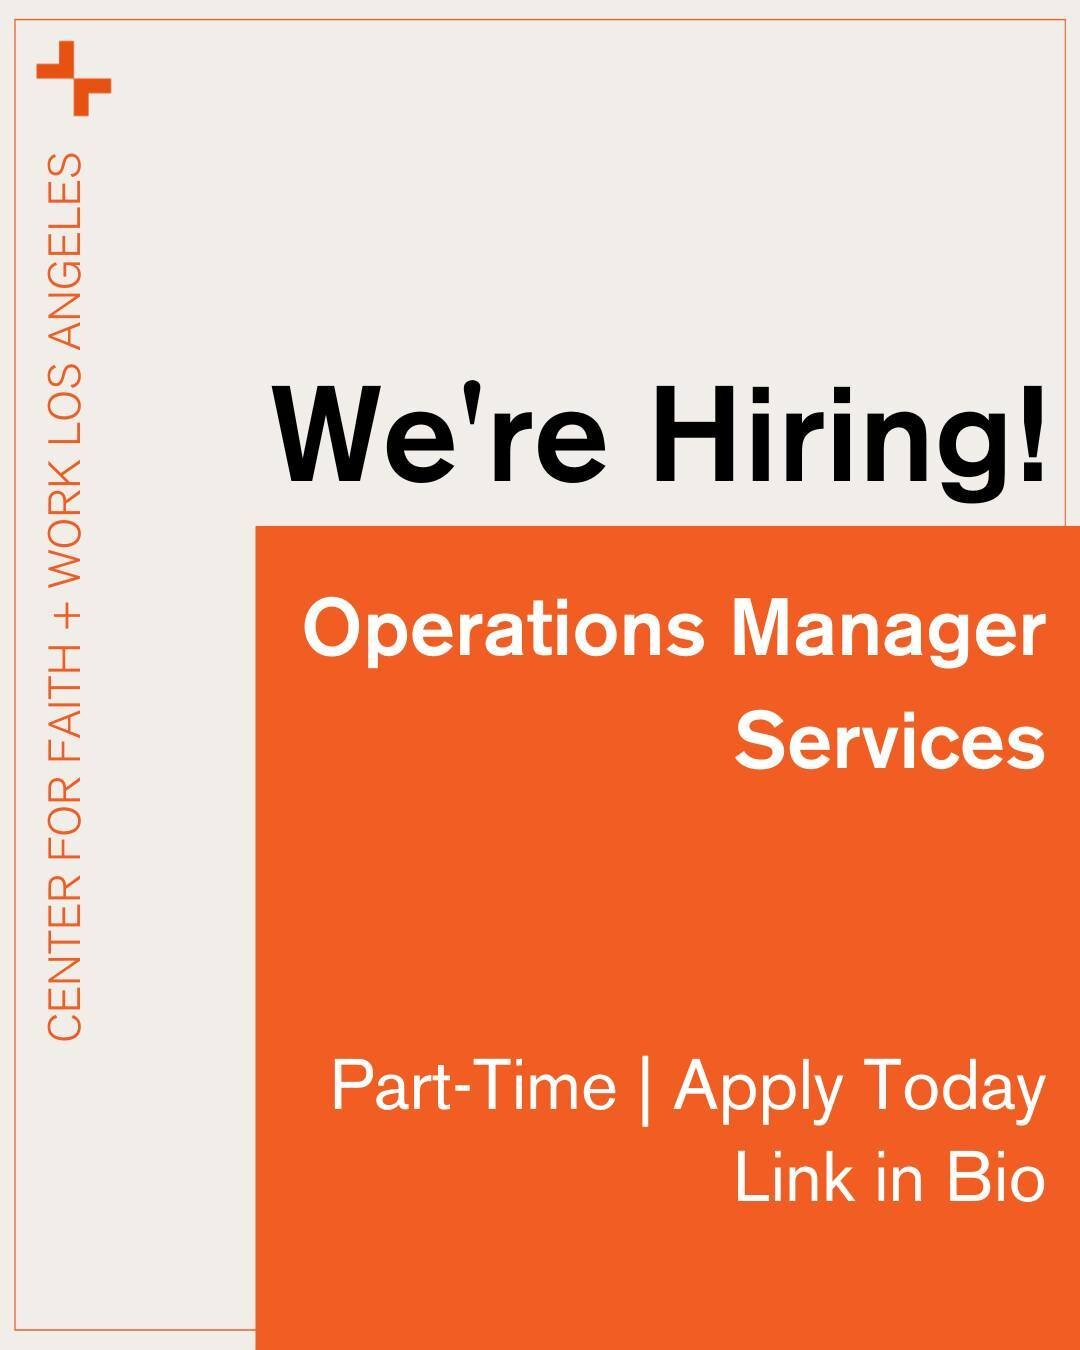 We're Hiring! Operations Manager Services | Part-Time 

The Center for Faith + Work Los Angeles seeks an individual experienced in Operations Manager services to oversee, manage, and help administrate all CFWLA programs and events. Along with managin